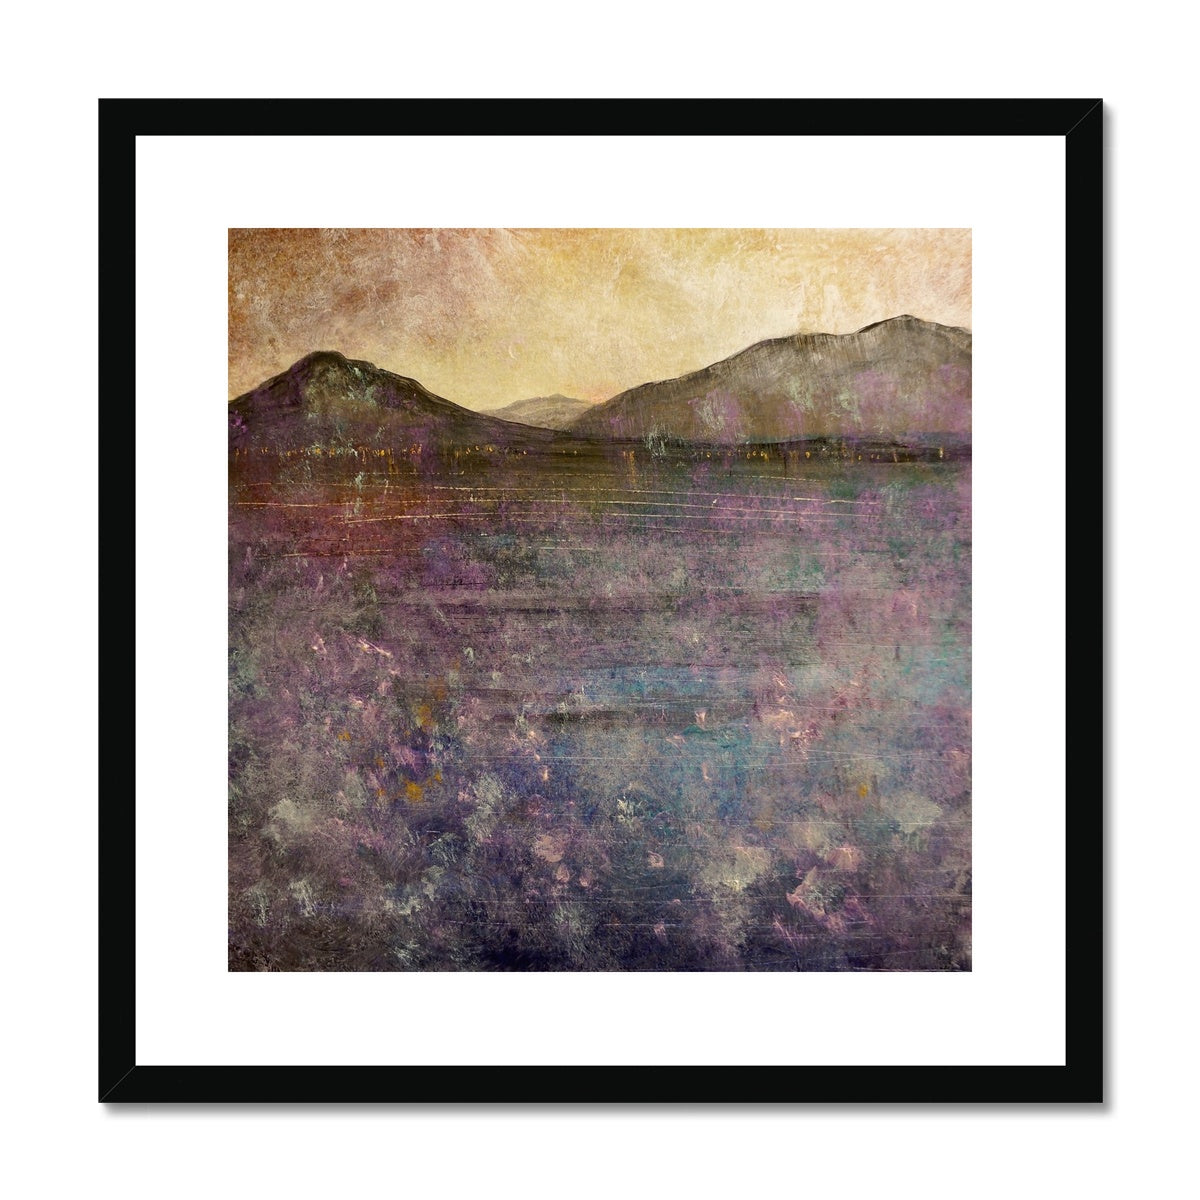 River Clyde Winter Dusk Painting | Framed & Mounted Prints From Scotland-Framed & Mounted Prints-River Clyde Art Gallery-20"x20"-Black Frame-Paintings, Prints, Homeware, Art Gifts From Scotland By Scottish Artist Kevin Hunter